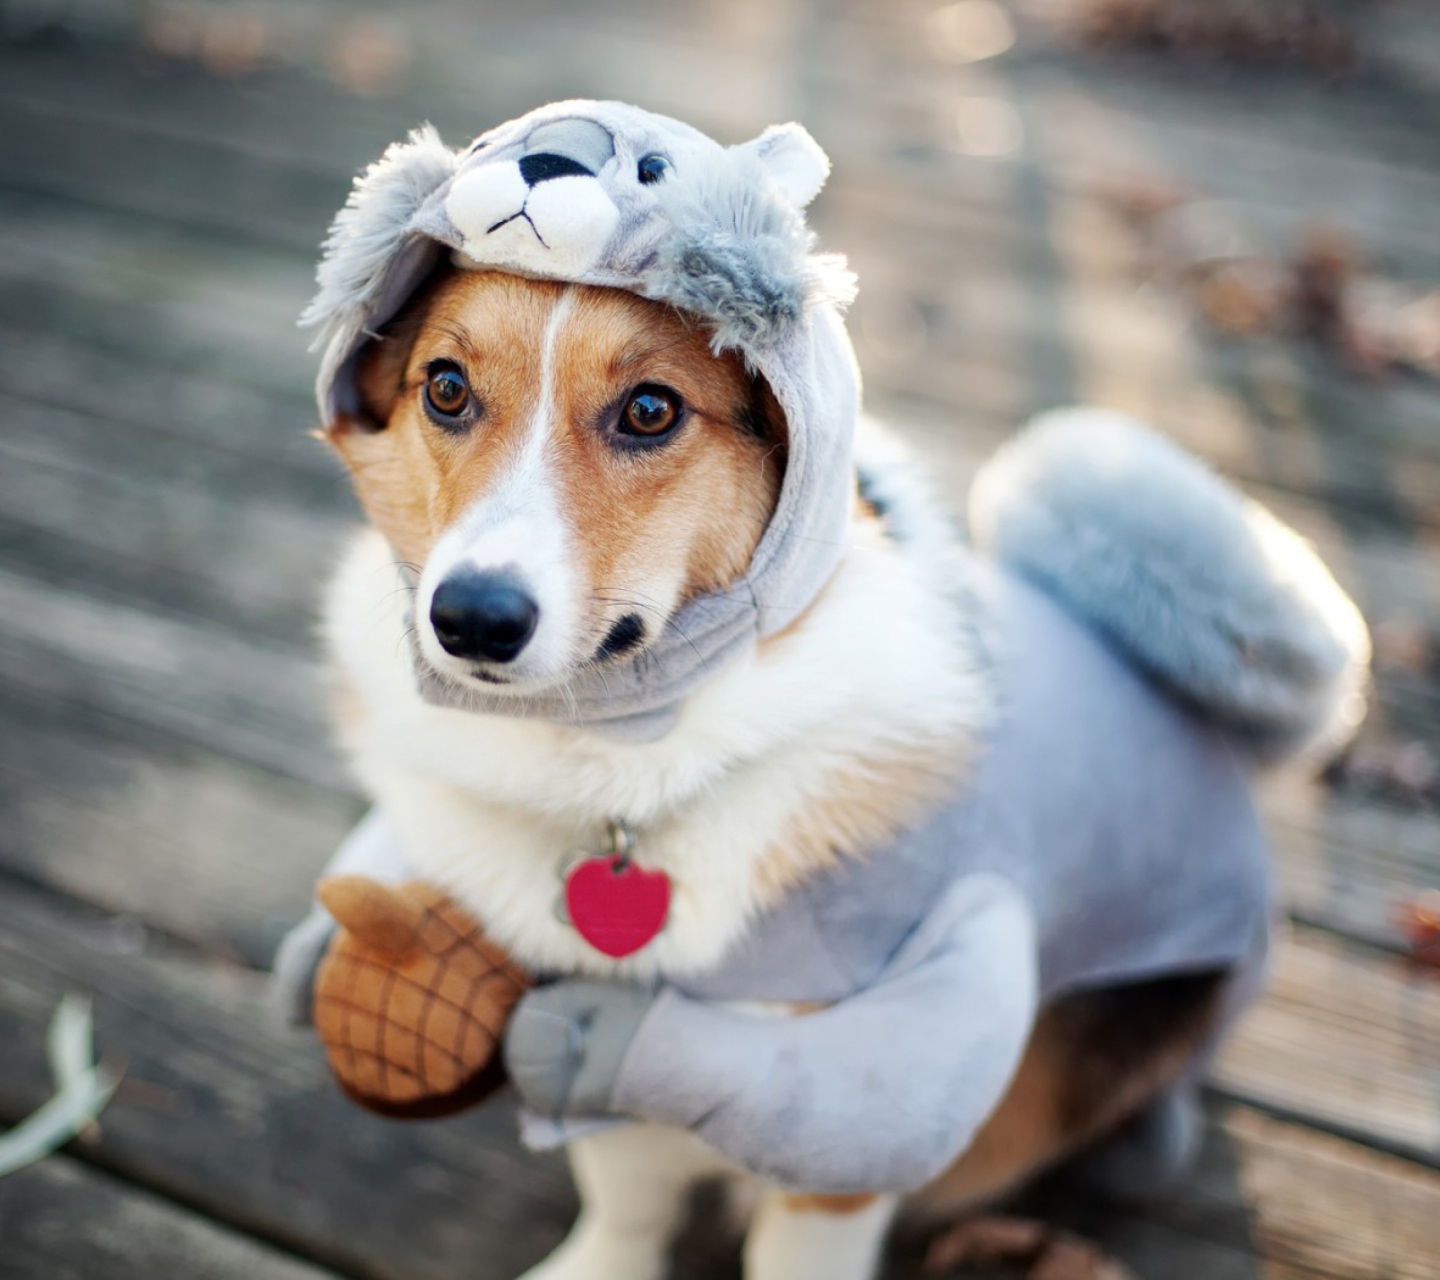 Dog In Funny Costume wallpaper 1440x1280